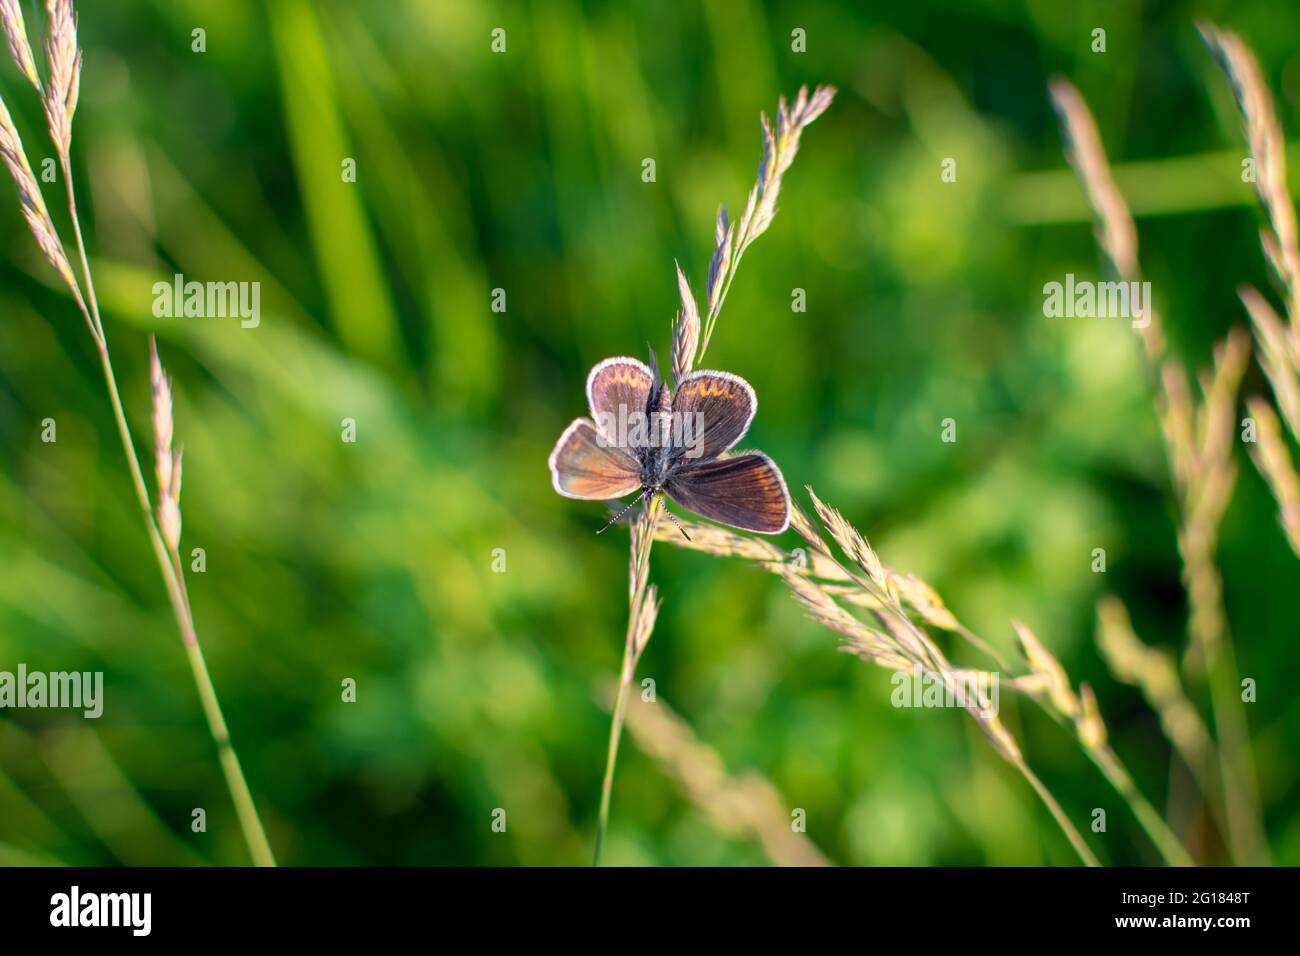 A small brown butterfly with spread wings is resting and sitting on the grass against a blurred green background. Common small brown butterfly in its Stock Photo